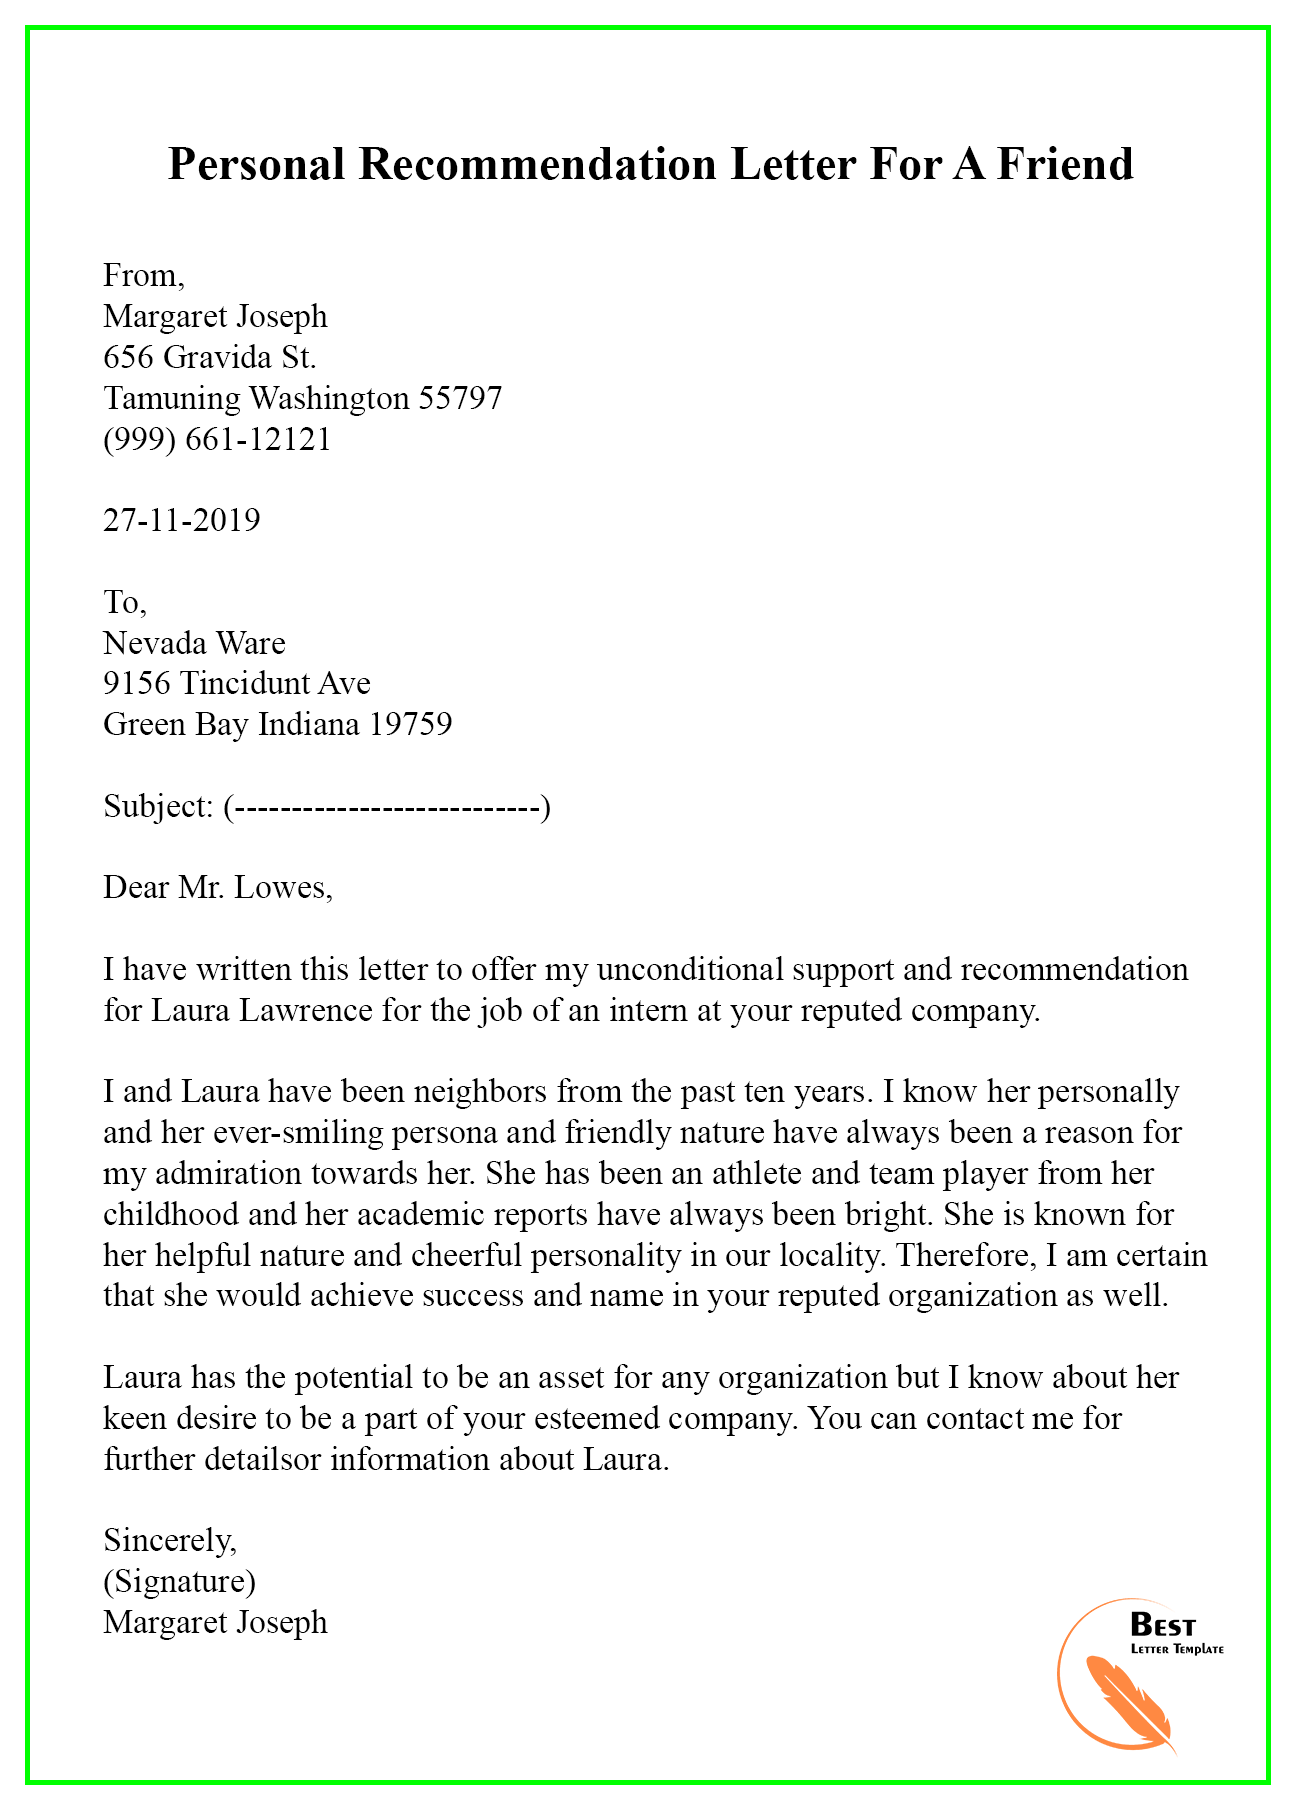 Recommendation Letter Template For a Friend